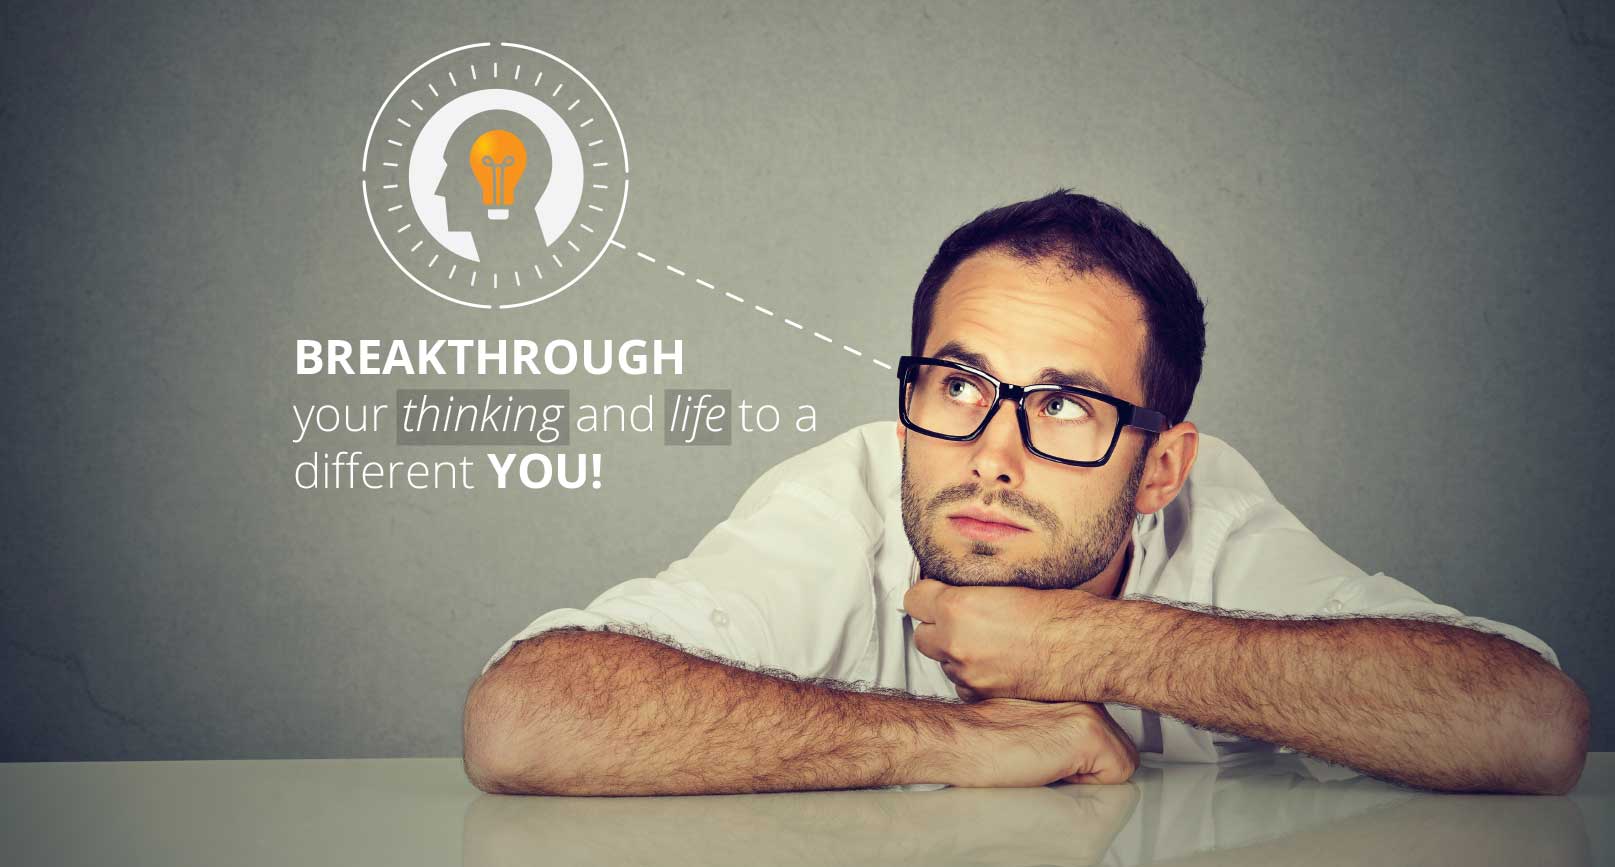 BREAKTHROUGH YOUR THINKING AND LIFE TO A DIFFERENT YOU